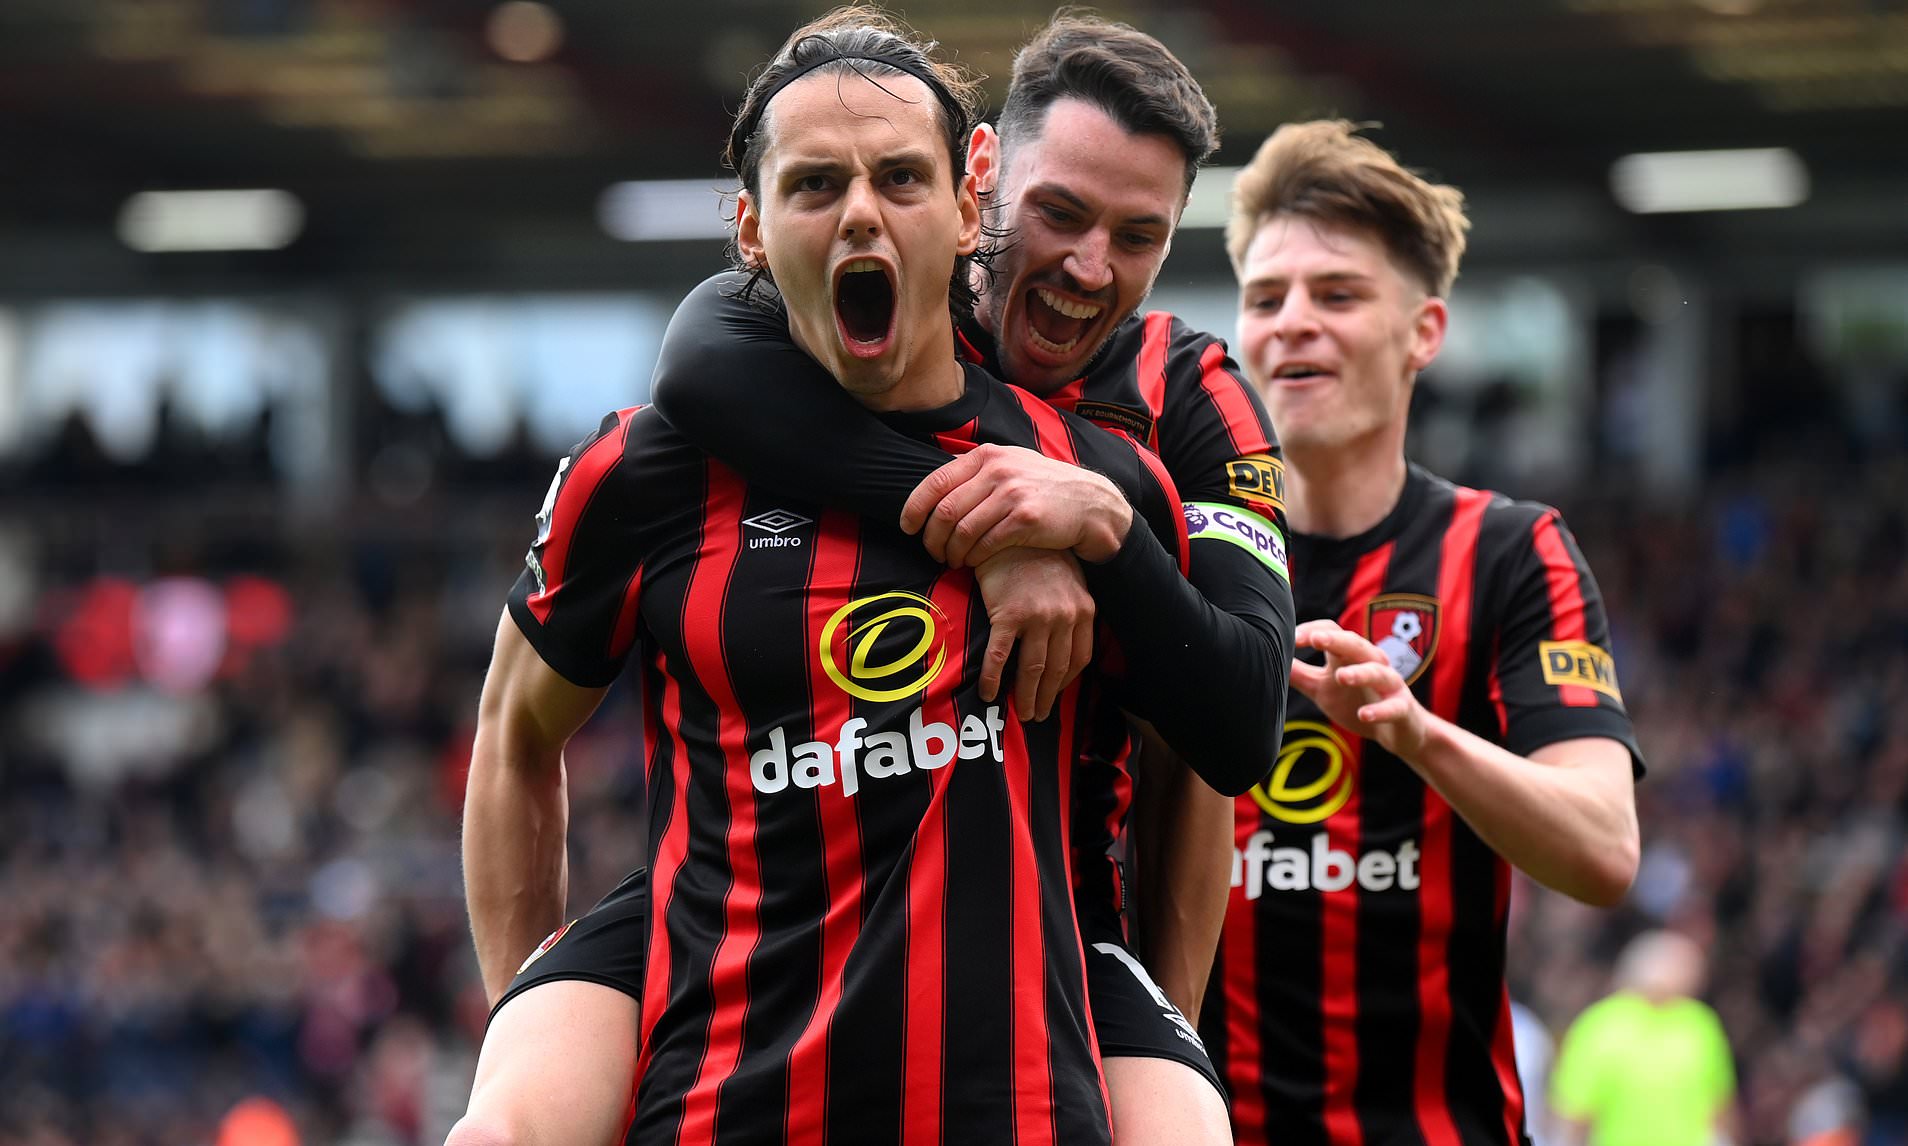 bournemouth 3-0 brighton: cherries move into the top half of the table